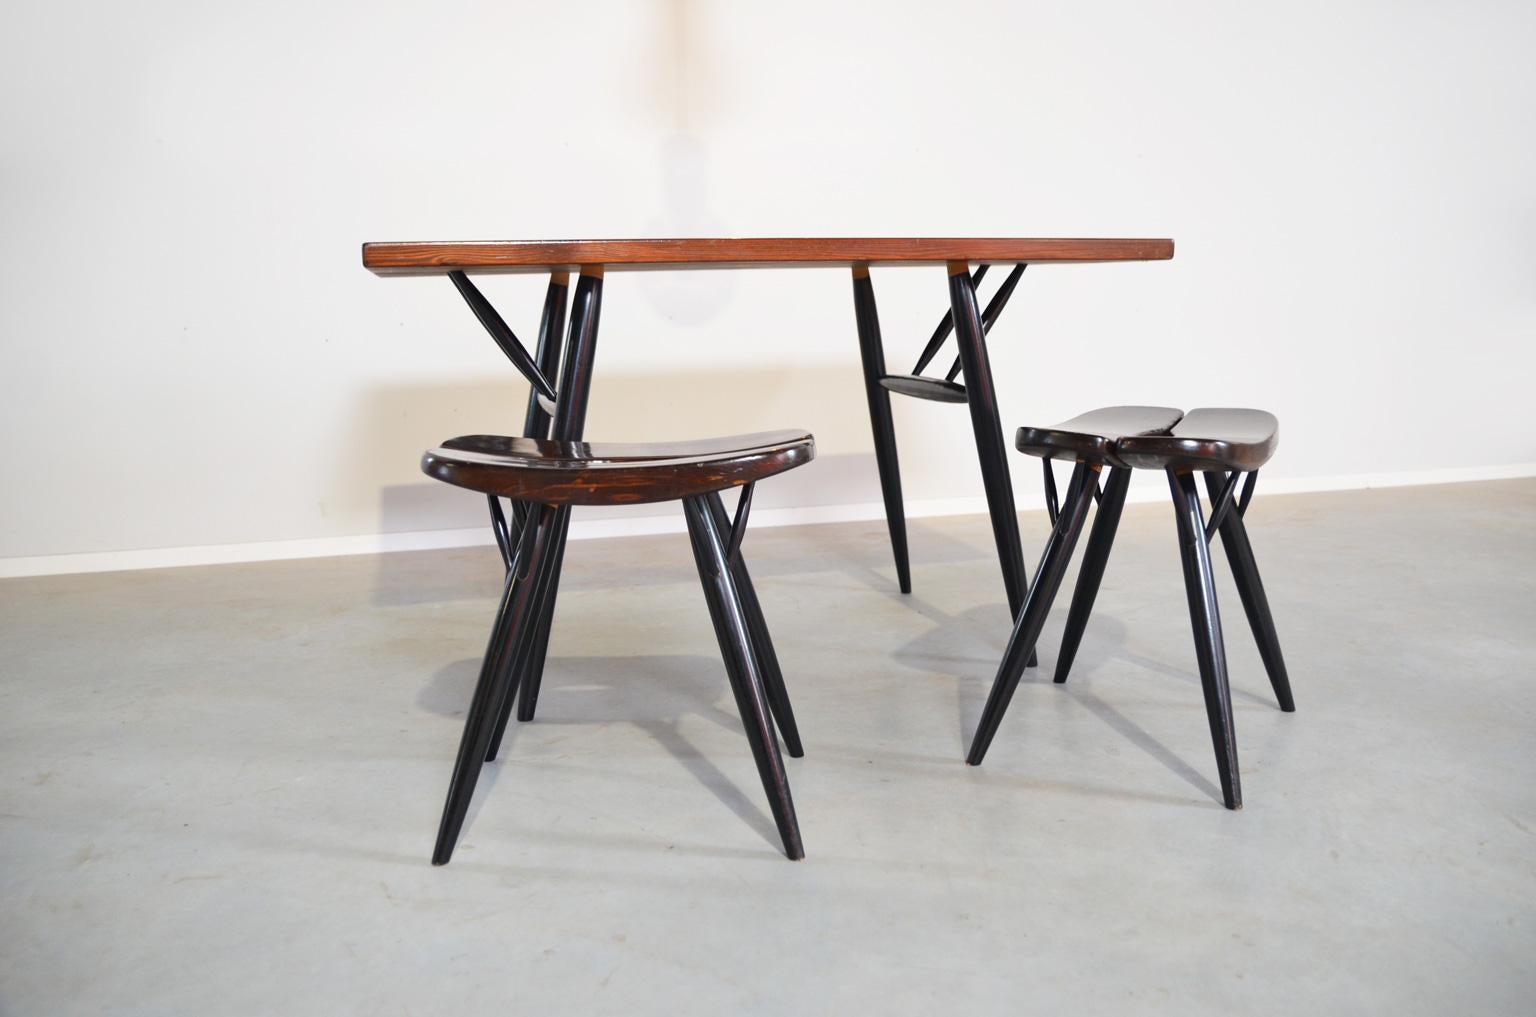 The Pirkka series by Ilmari Tapiovaara for Laakan Puu consists of chairs, stools, benches and tables and are famous for its split in seating’s and tabletop. The stools are marked on the bottom (image 12). Measurements: table: height 68 cm, length